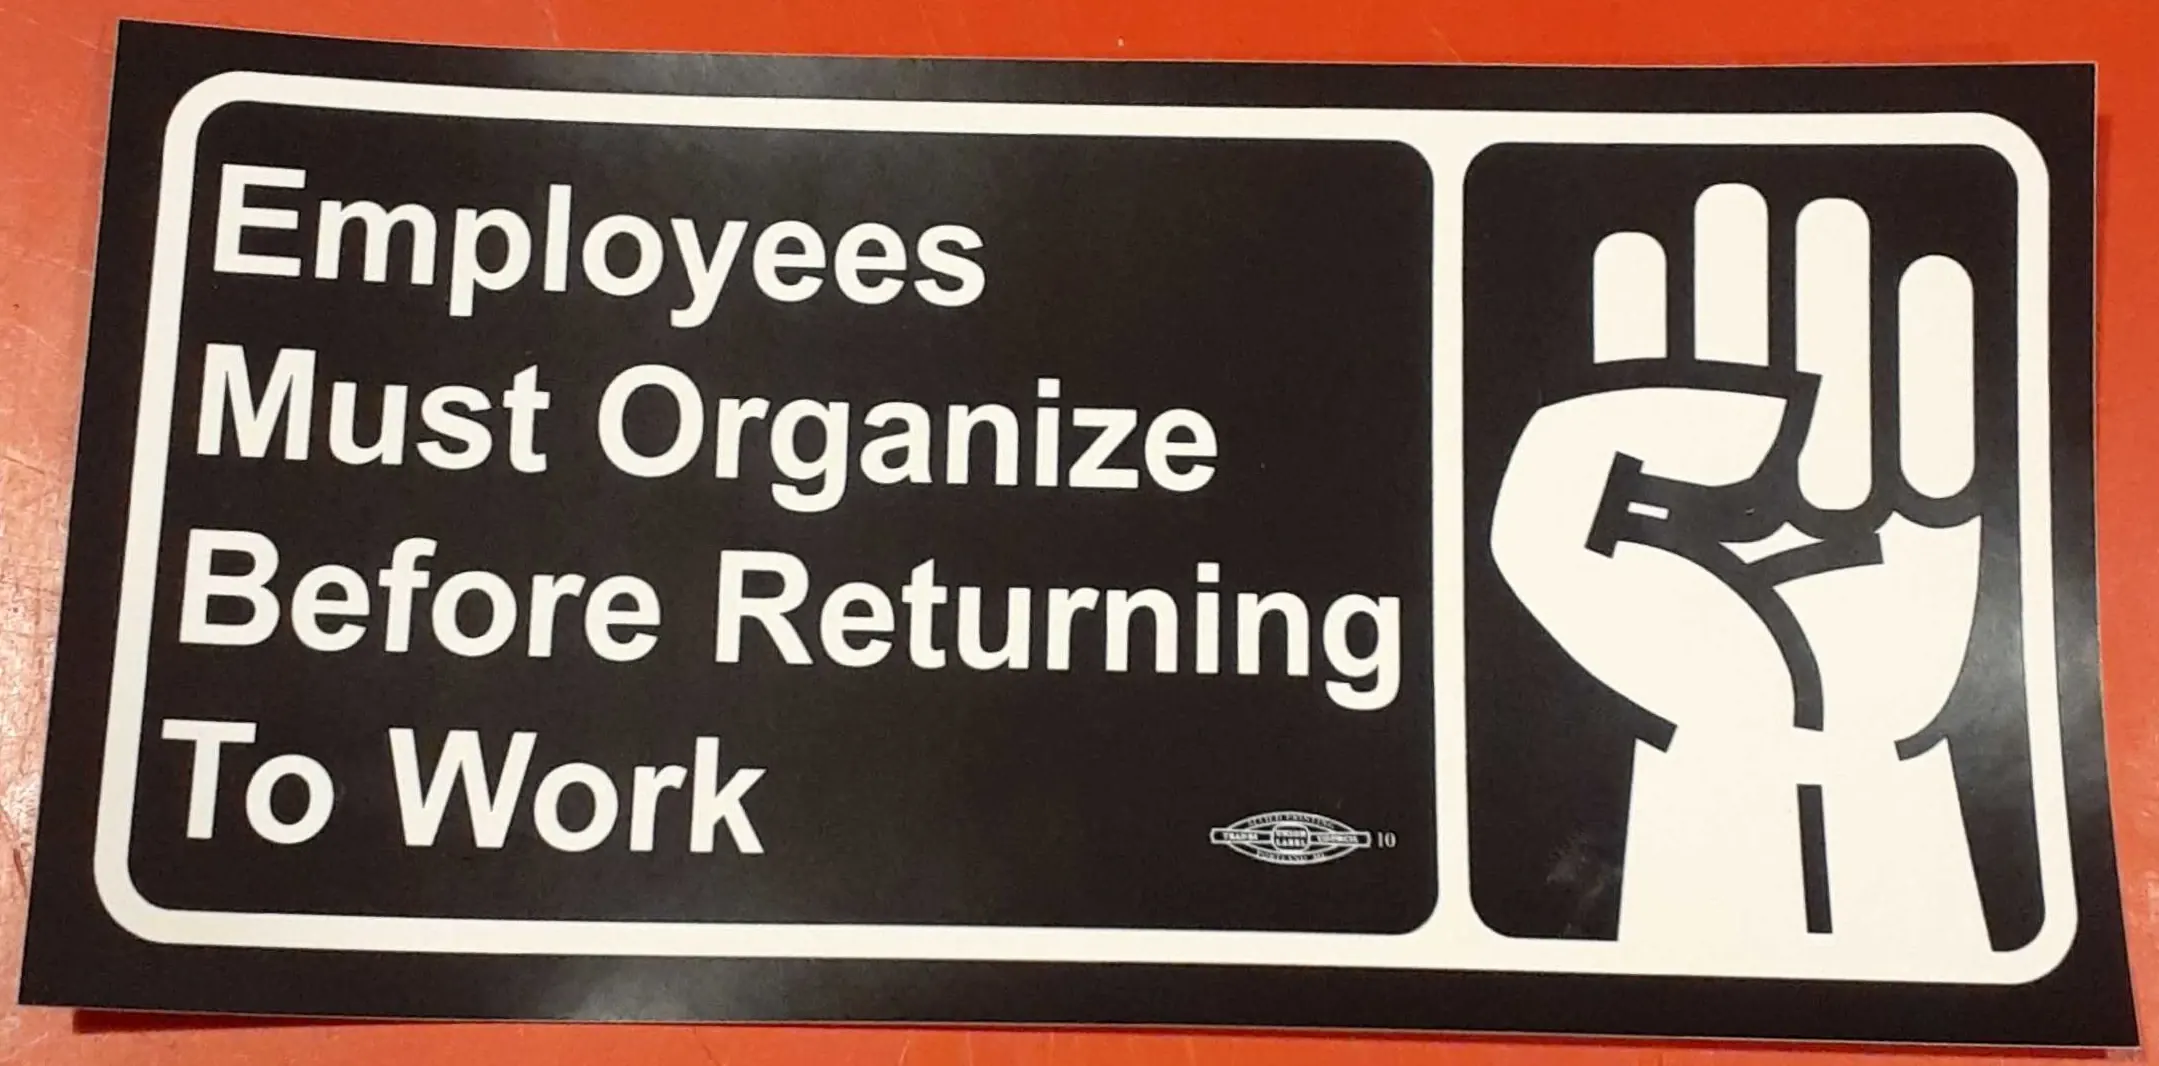 Employees must organize before returning to work sticker in the style of a handwashing reminder sticker with a raised fist instead of hands being washed.